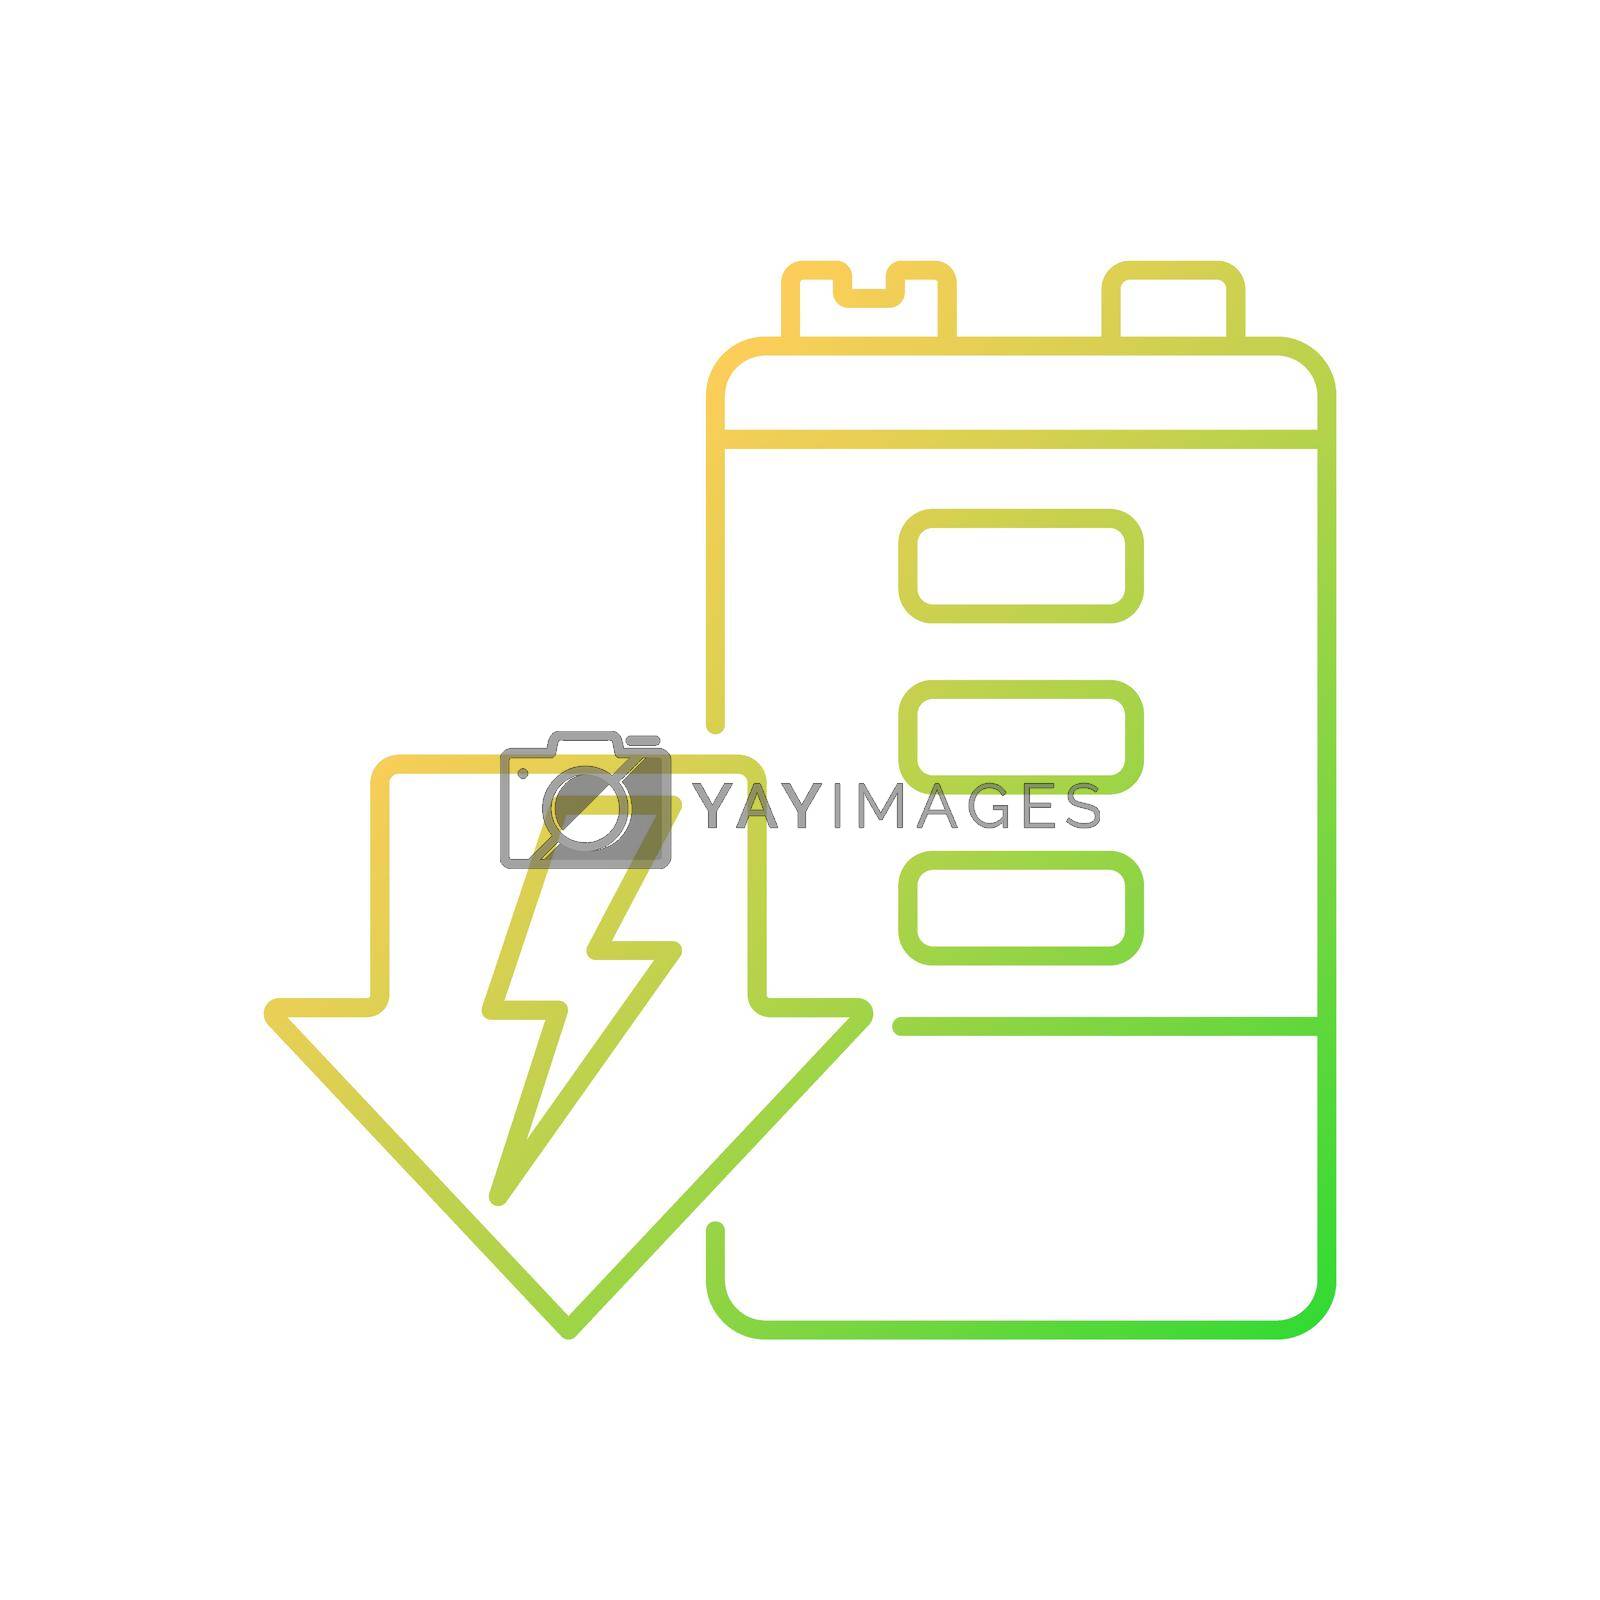 Royalty free image of Battery discharging gradient linear vector icon by bsd